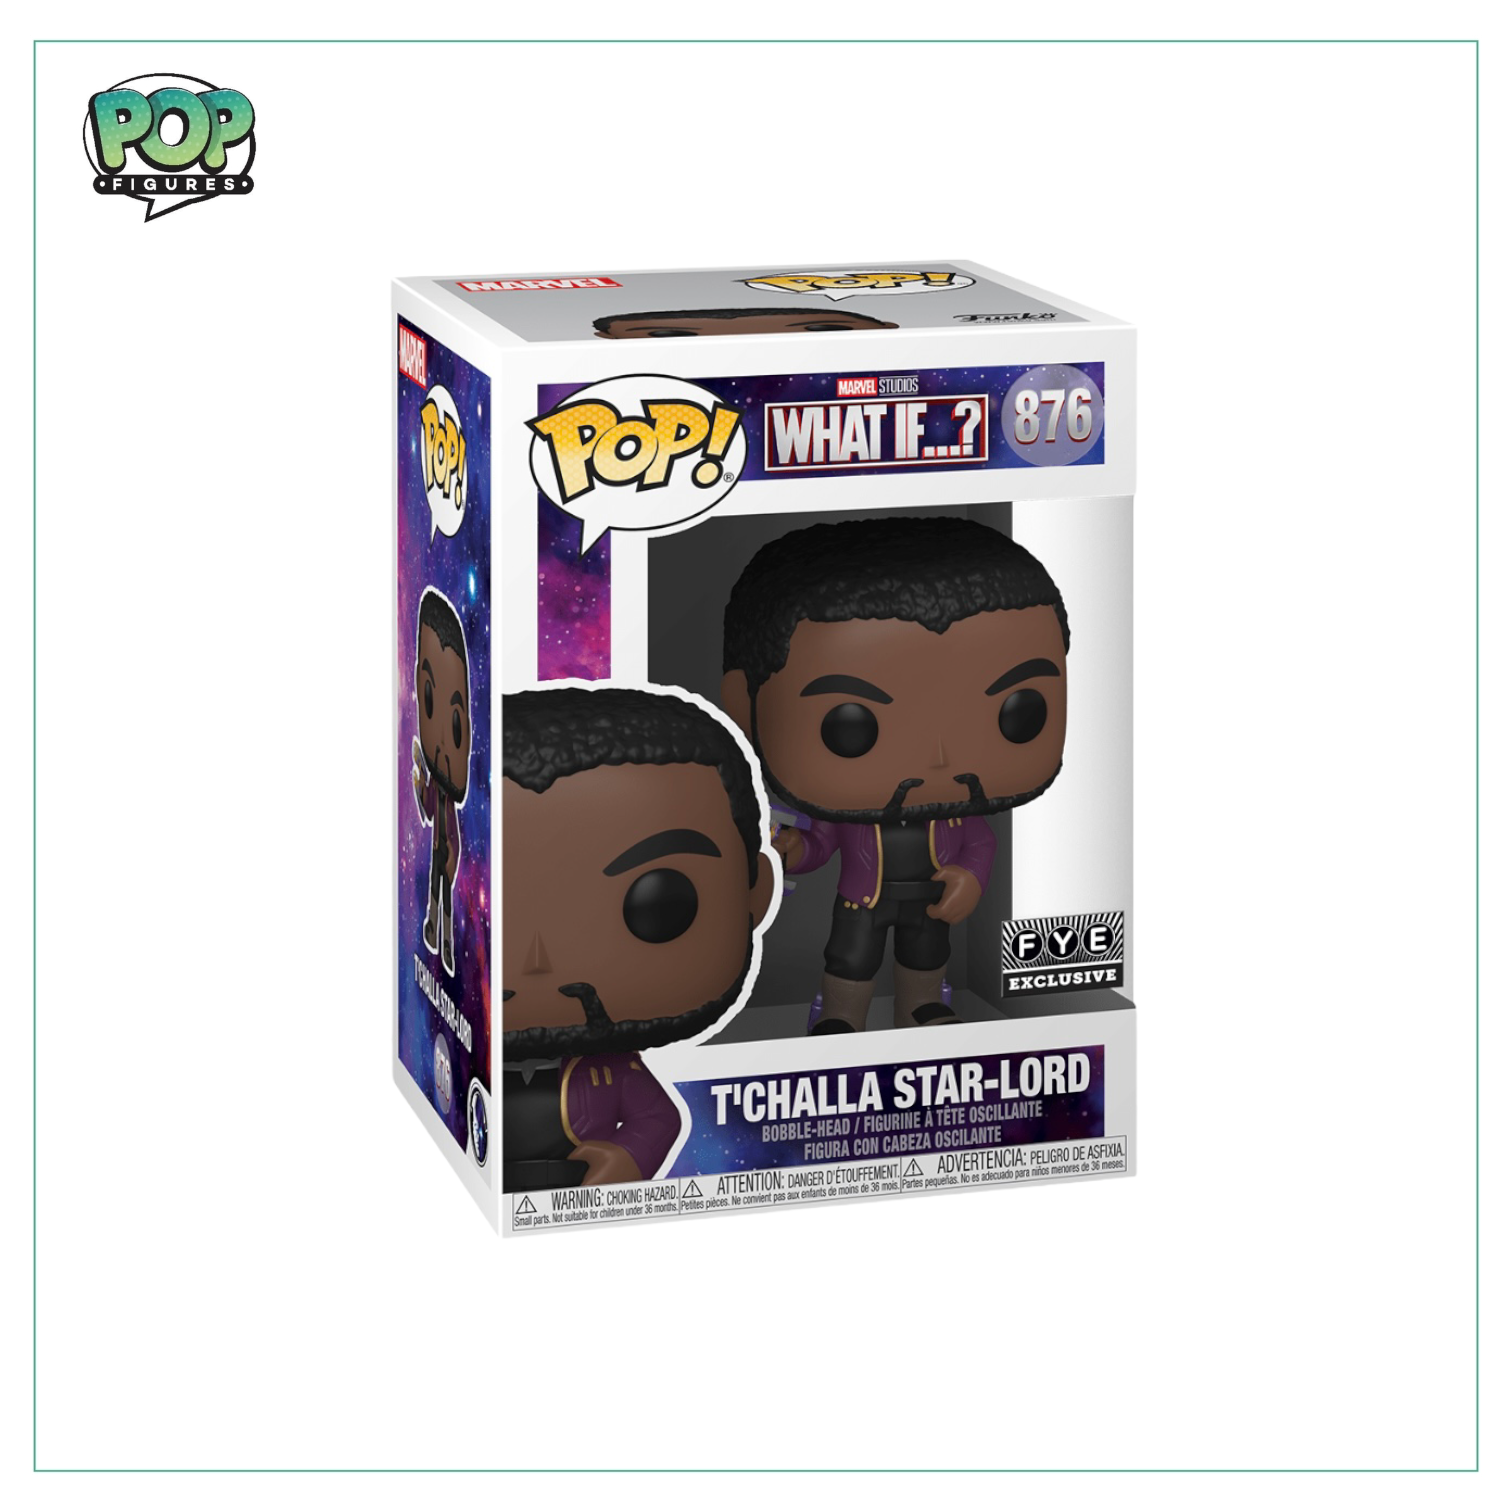 T’Challa Star Lord #876 Funko Pop! What If? FYE Exclusive